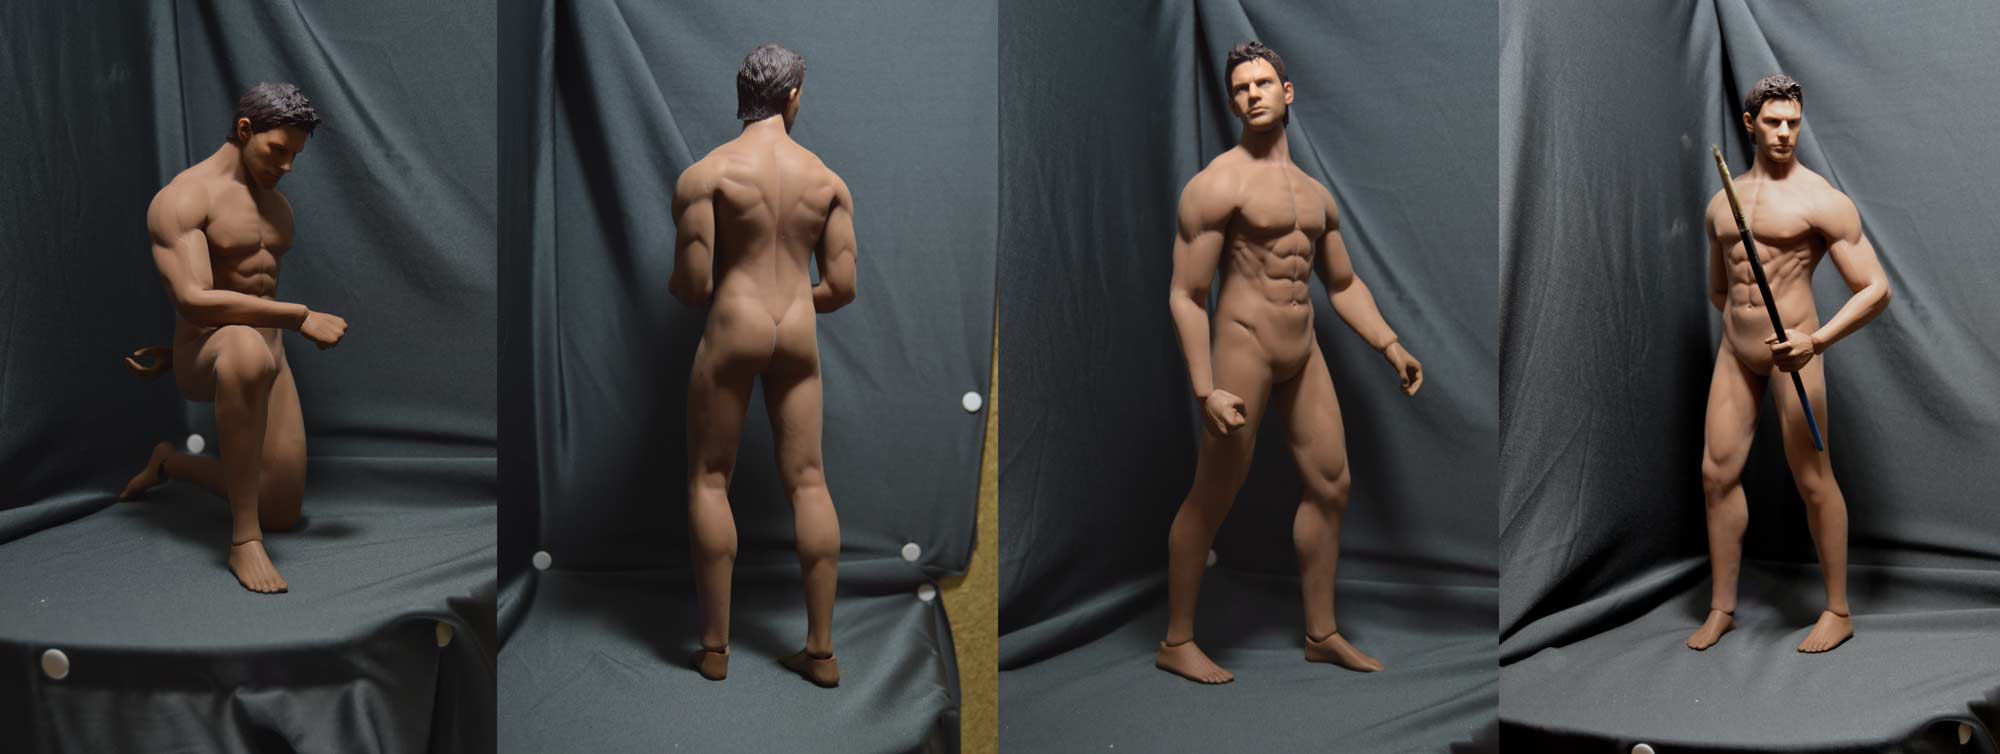 dan creech recommends Nude Poses For Men